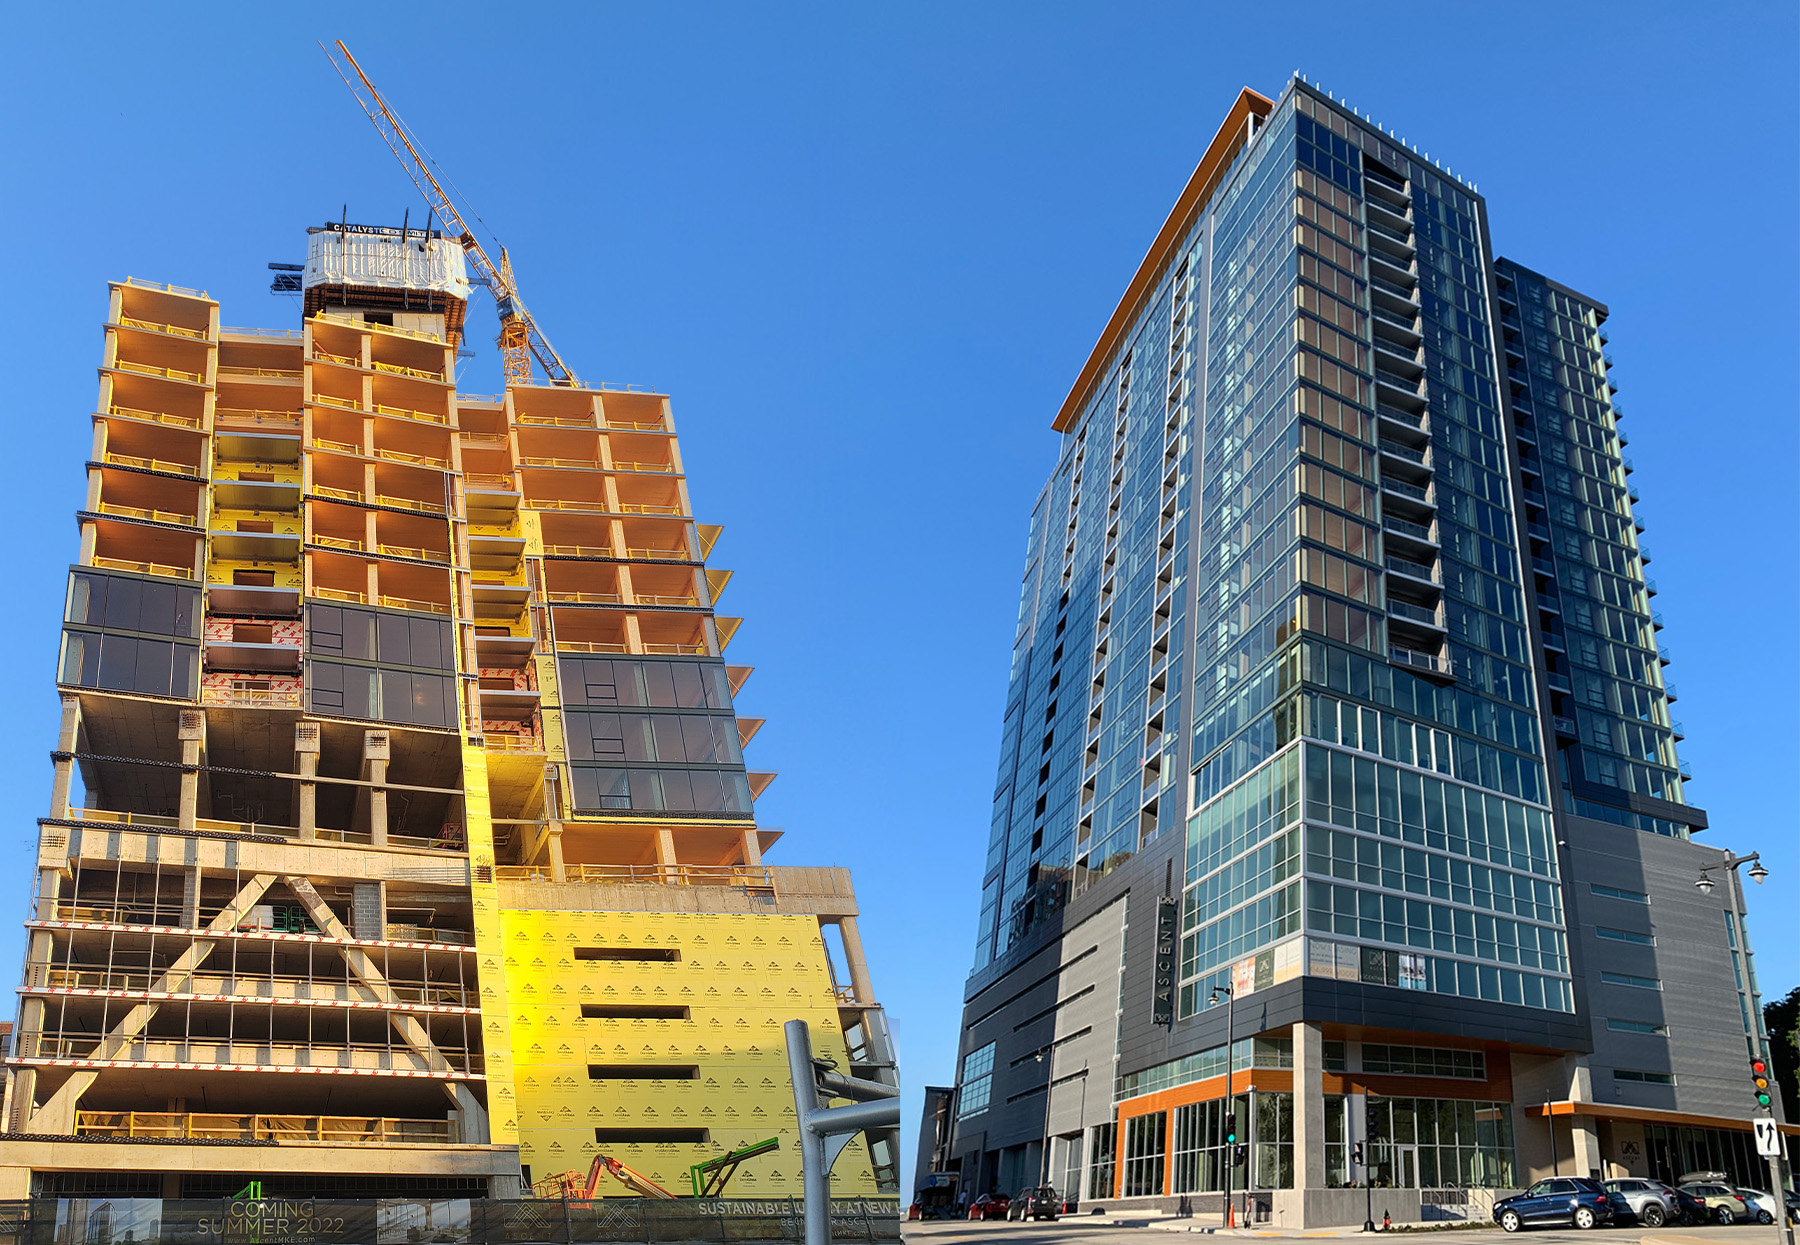  Left photo shows the construction of a high-rise building made of timber and other materials. Right photo shows the construction of a high-rise building made of timber and other materials. 